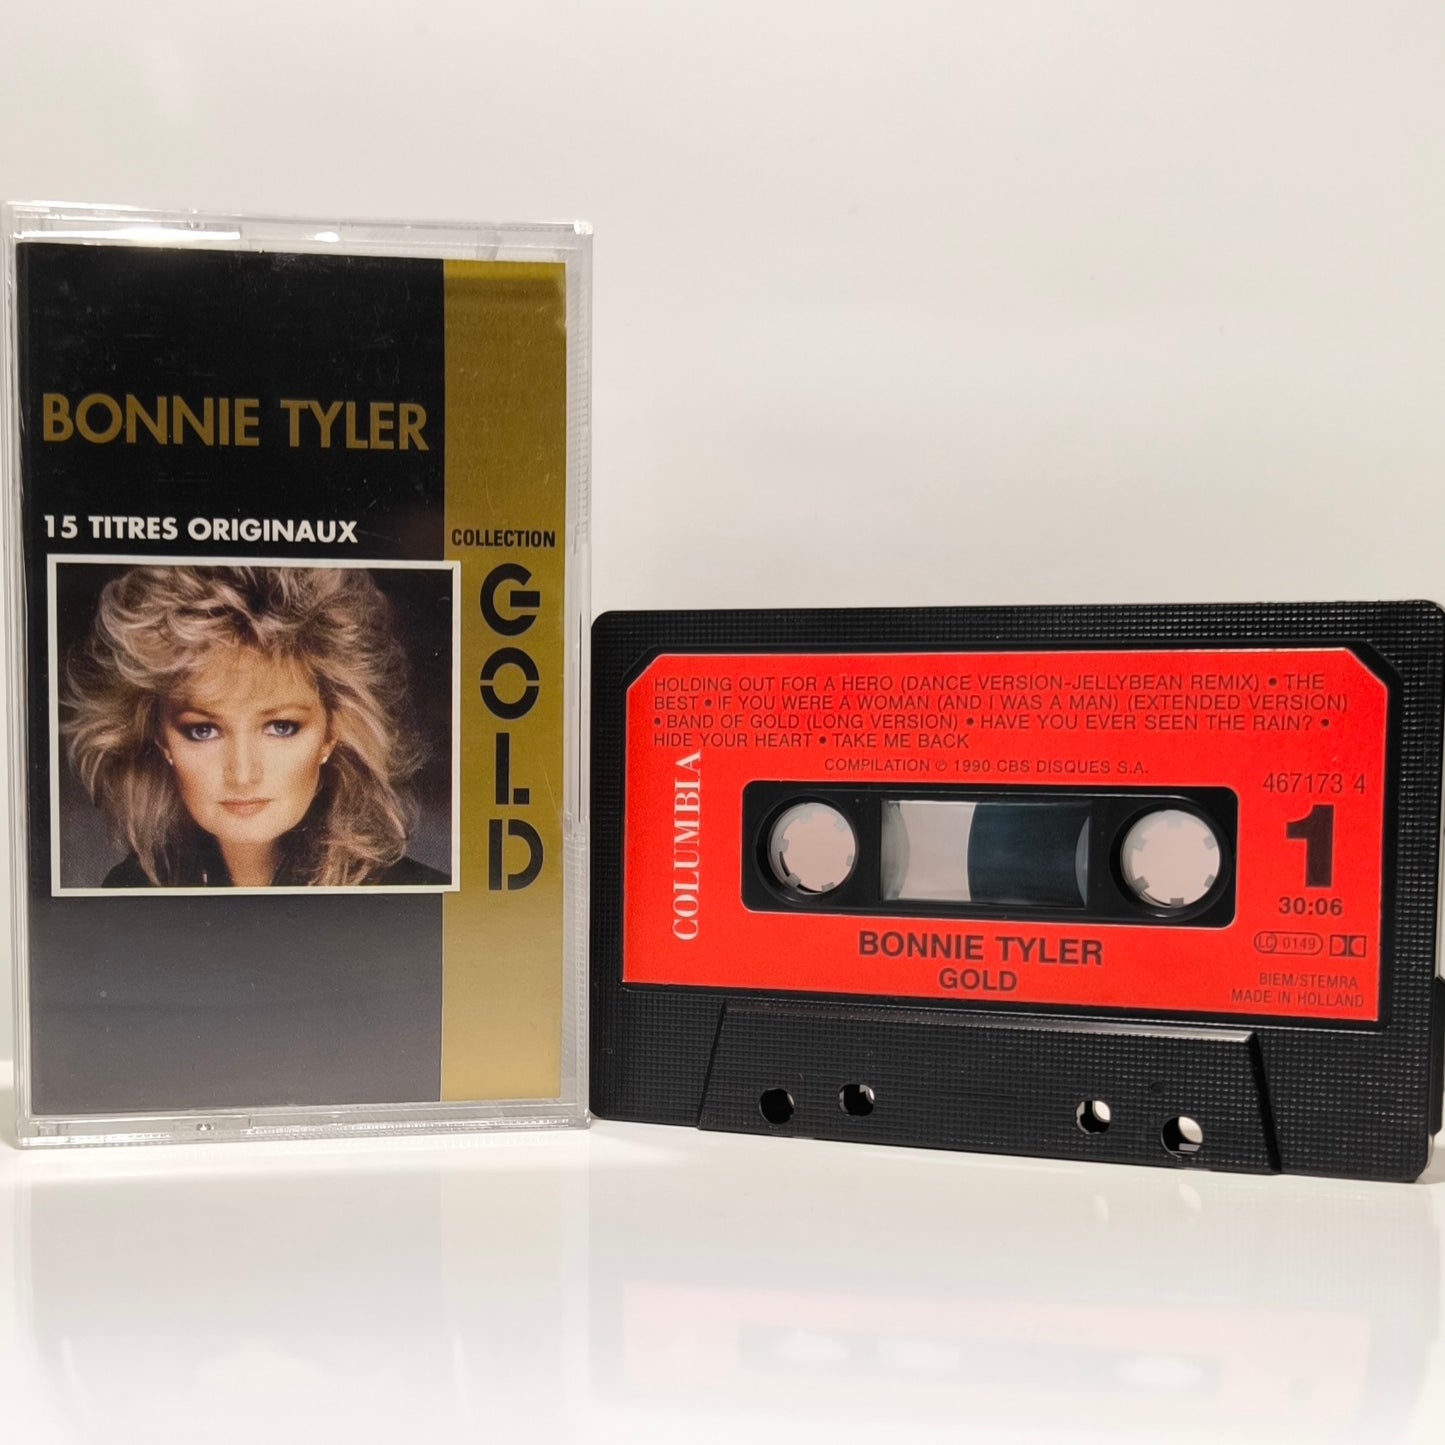 BONNIE TYLER - Collection Gold